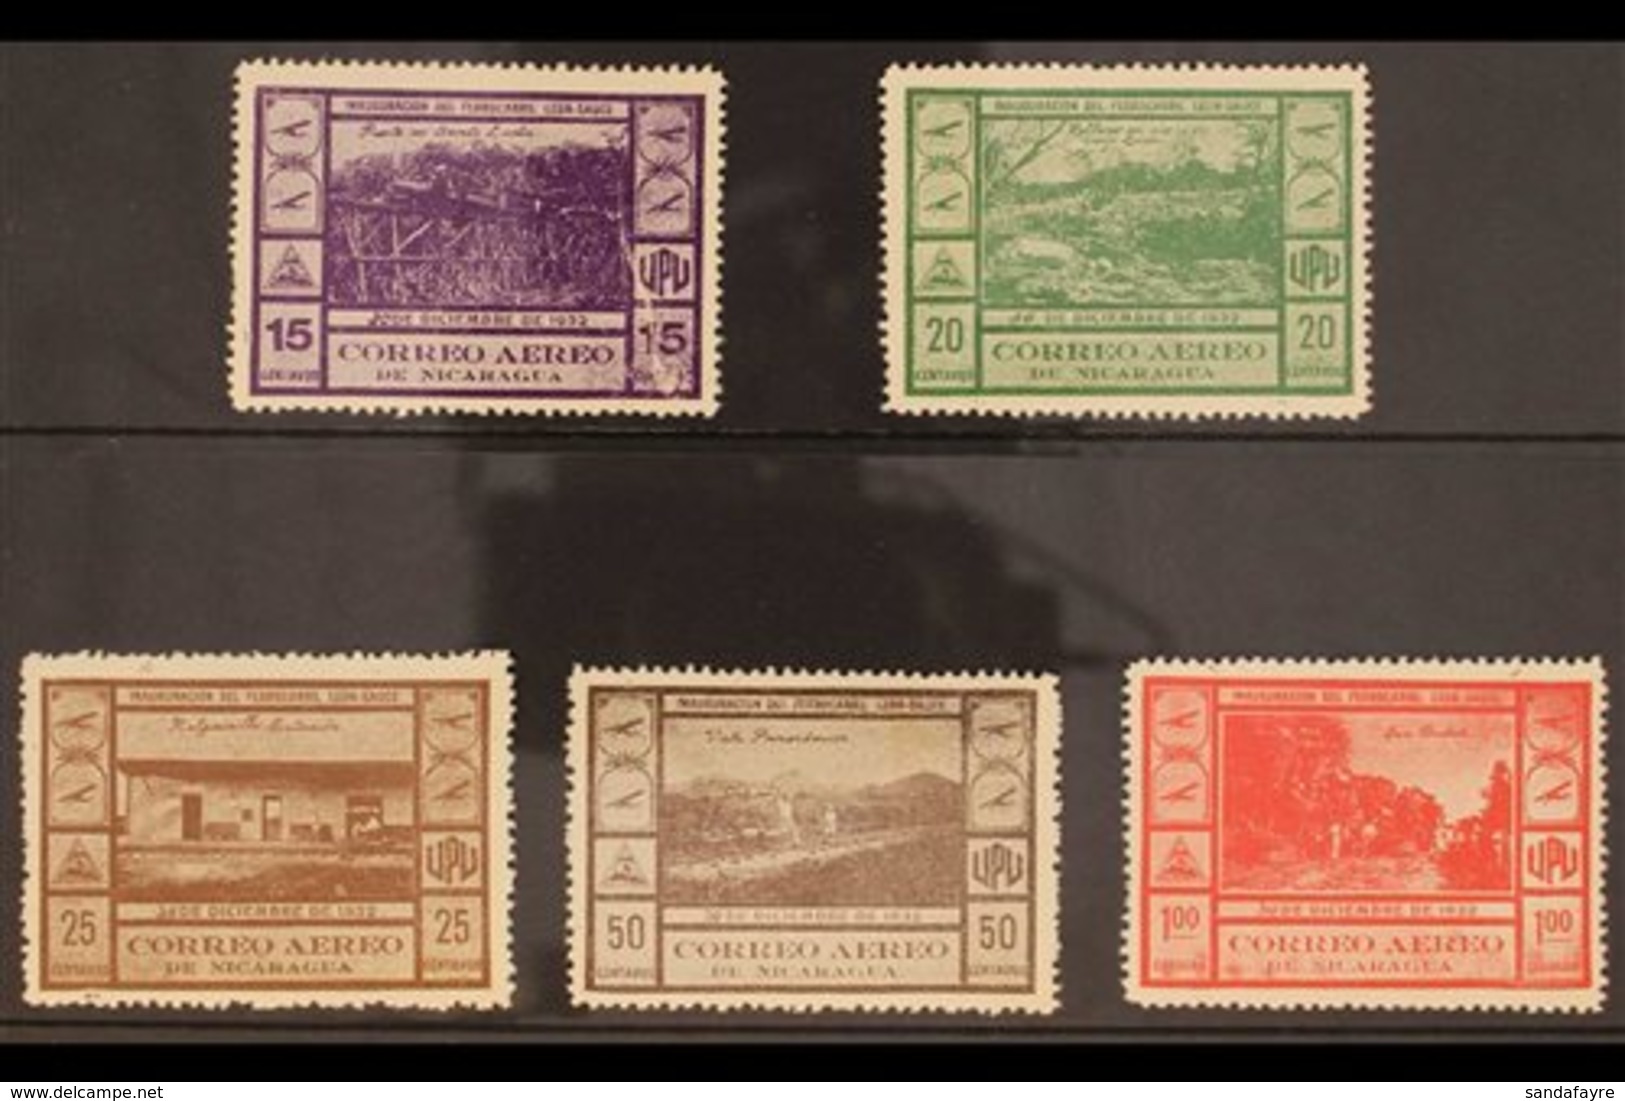 1932 Leon-Sauce Railroad Complete Air Set, SG 744/748 Or Scott C72/76, Very Fine Unused Without Gum As Issued. (5 Stamps - Nicaragua